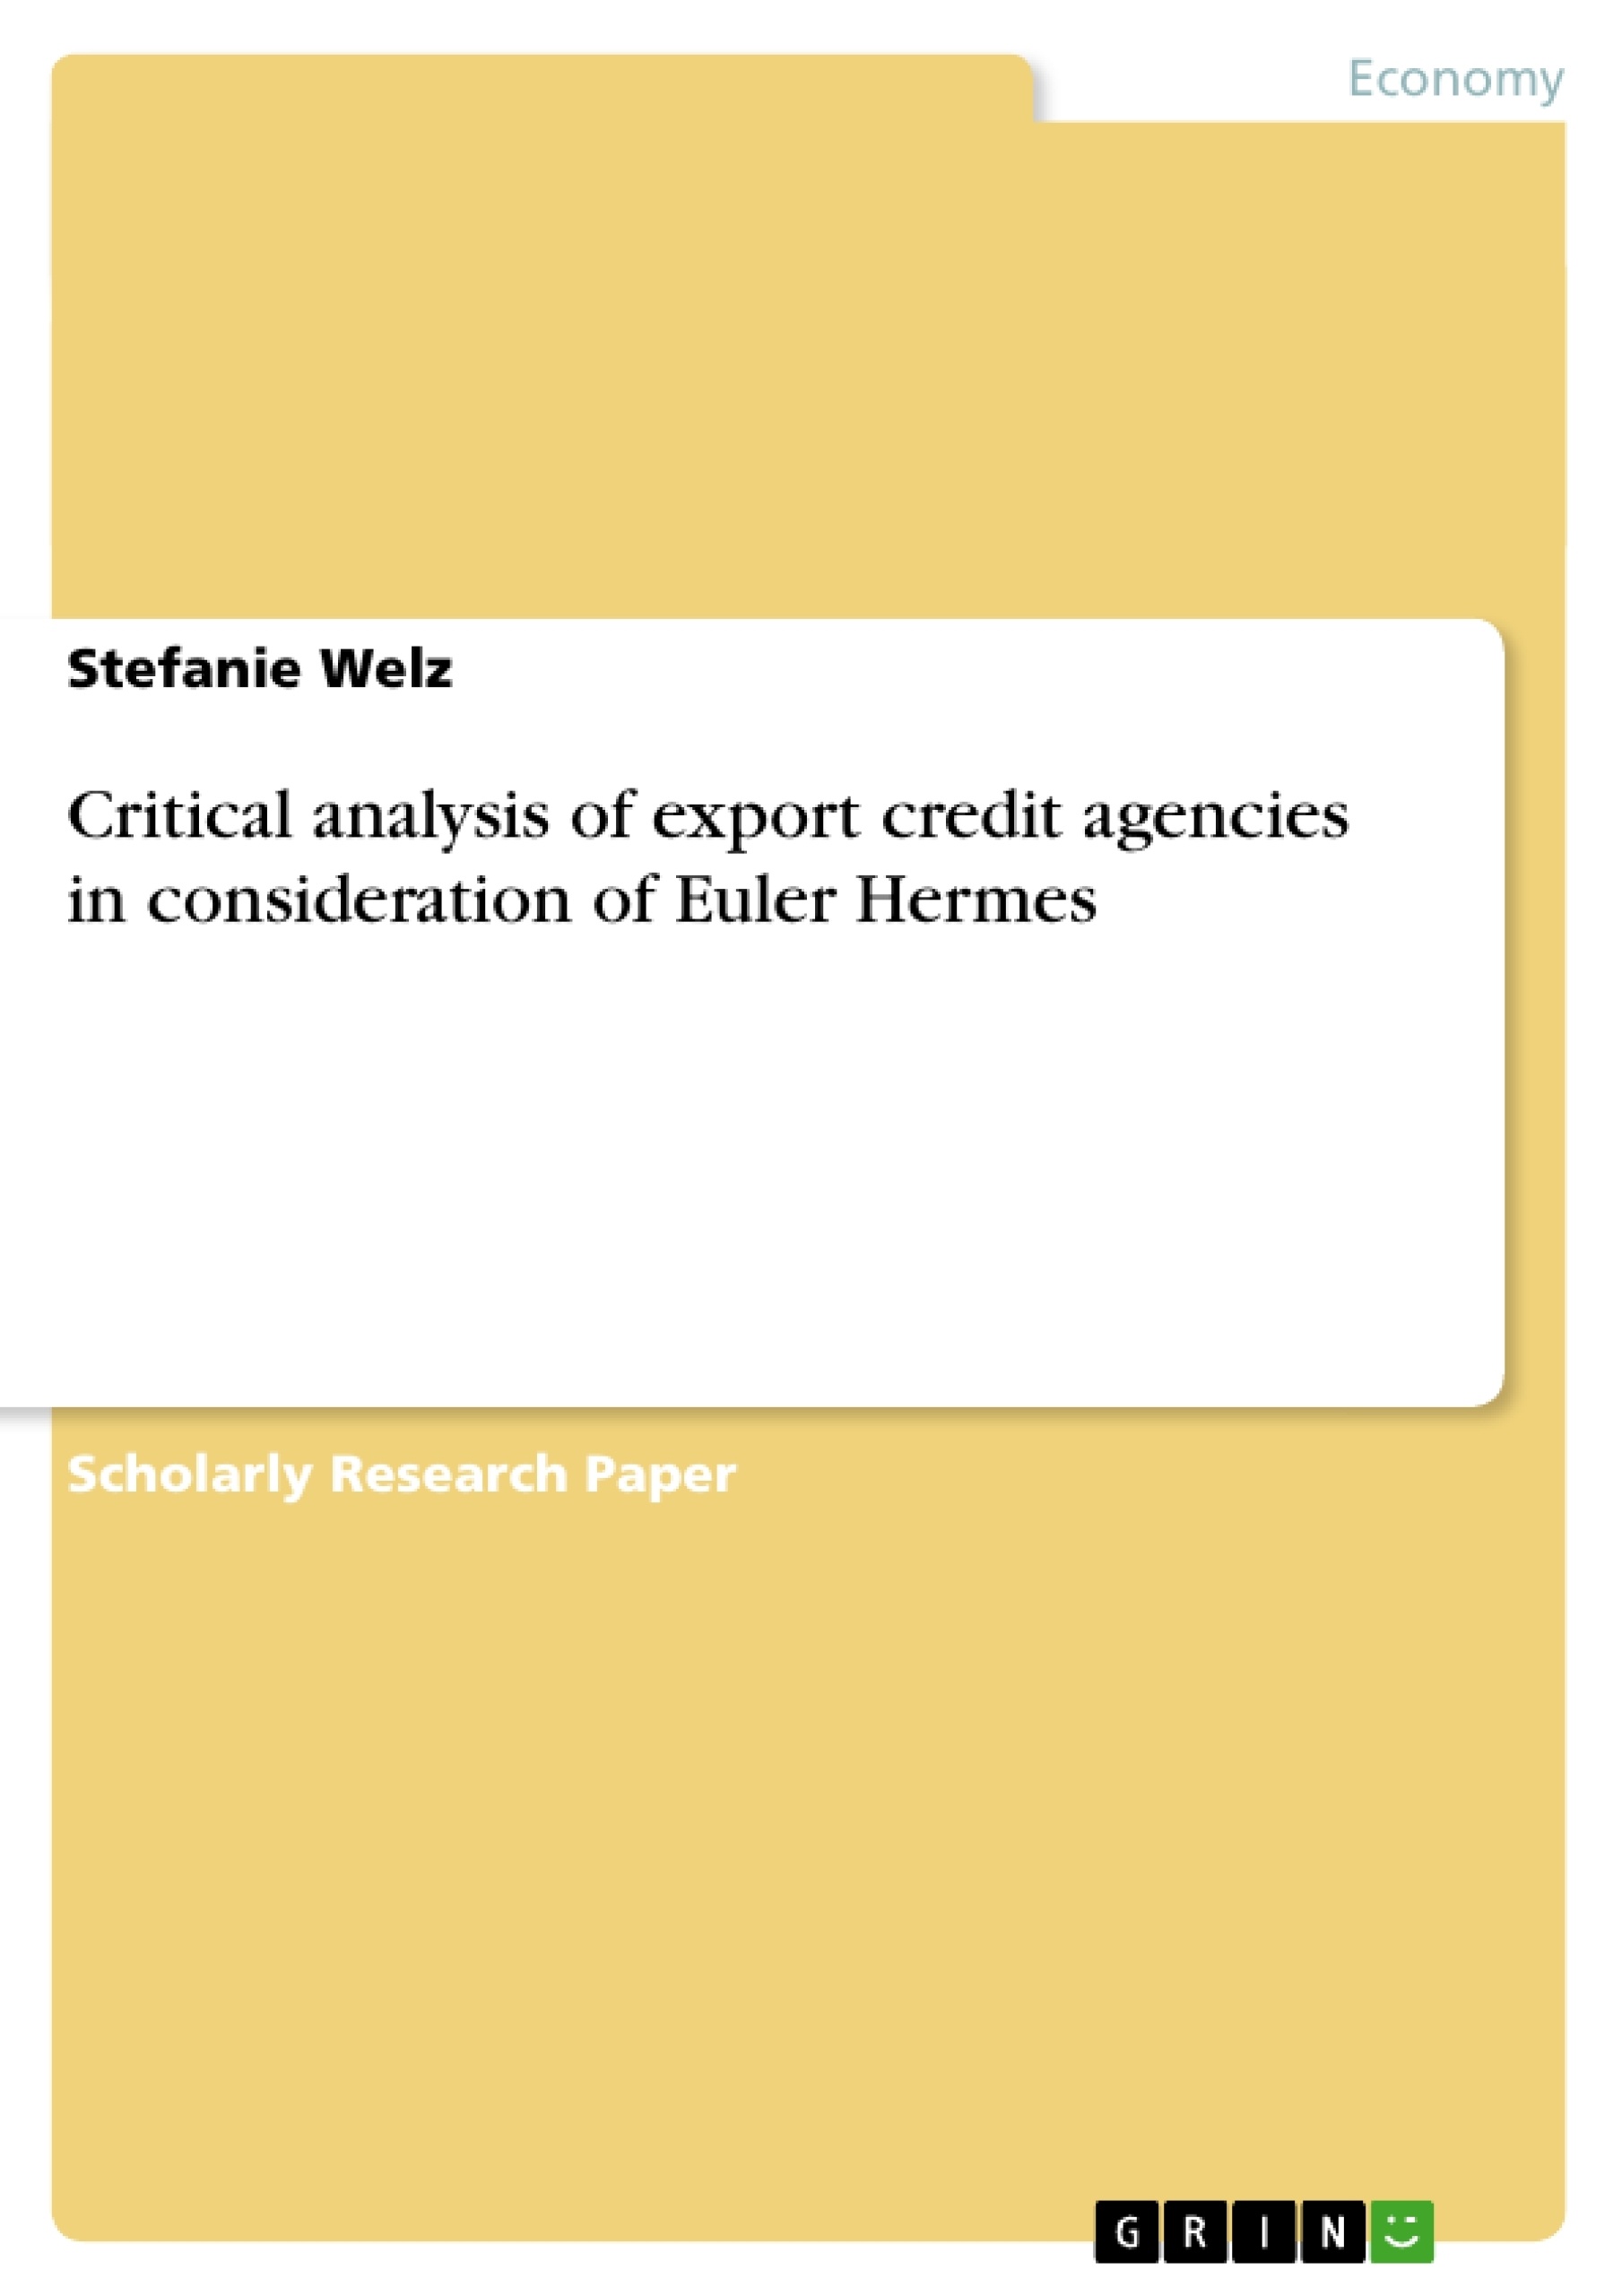 Title: Critical analysis of export credit agencies in consideration of Euler Hermes